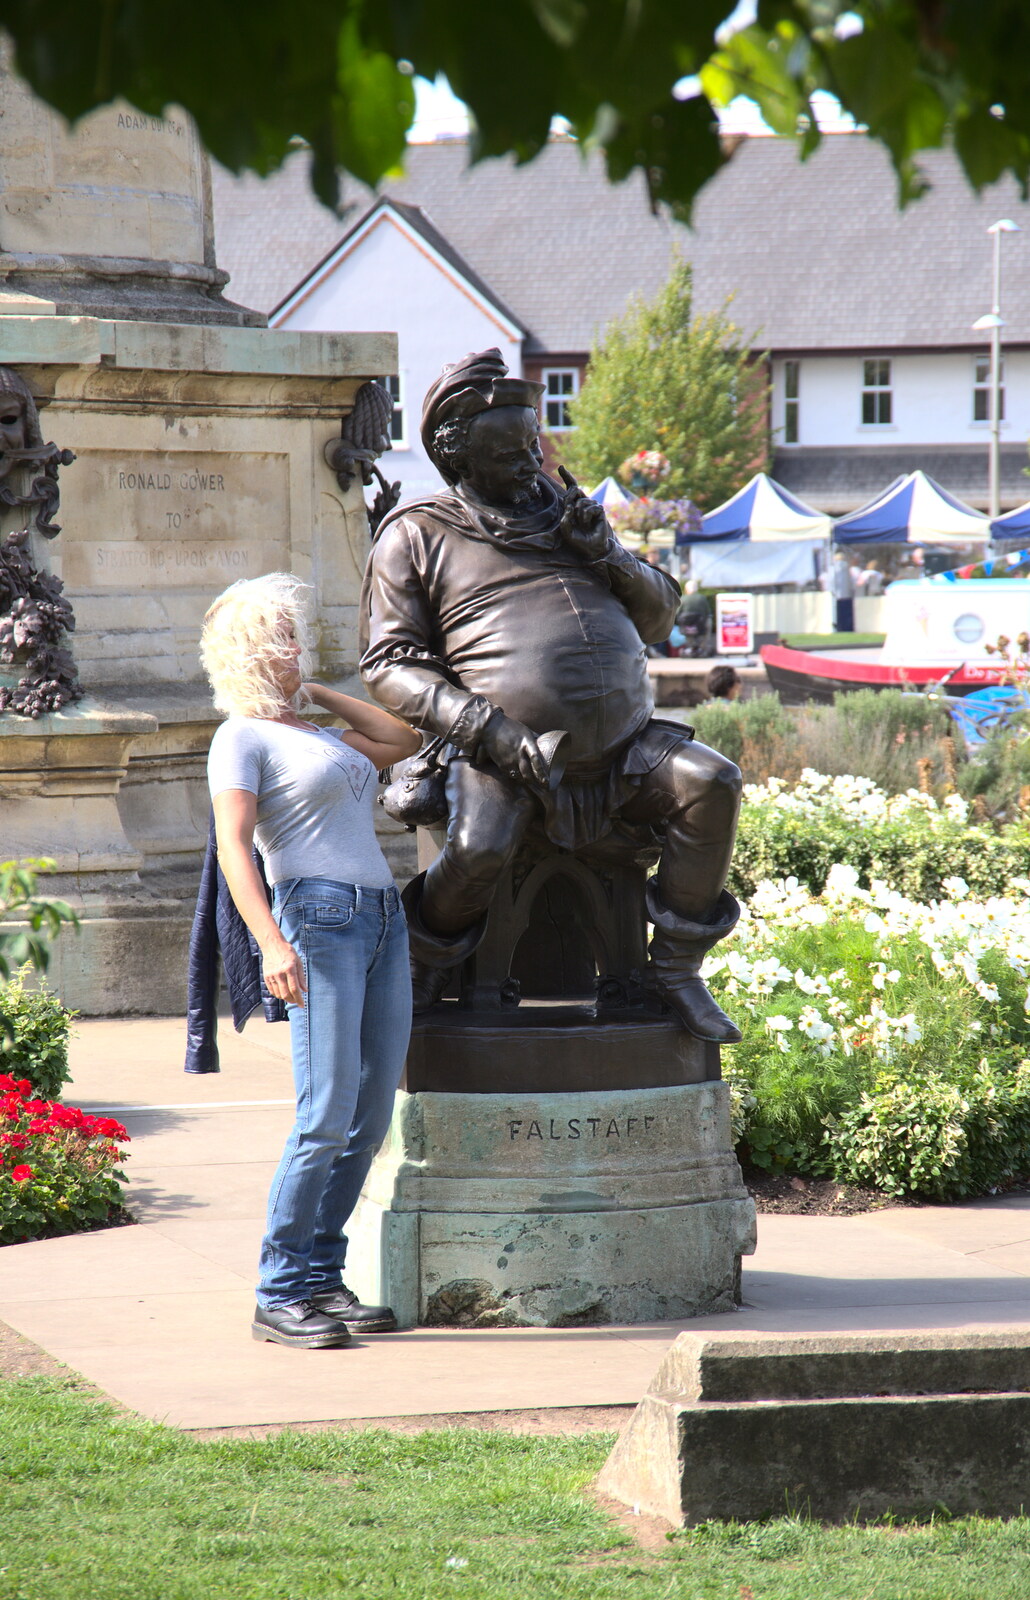 Somebody mimics the statue of Falstaff from A Postcard from Stratford-upon-Avon, Warwickshire - 9th September 2018